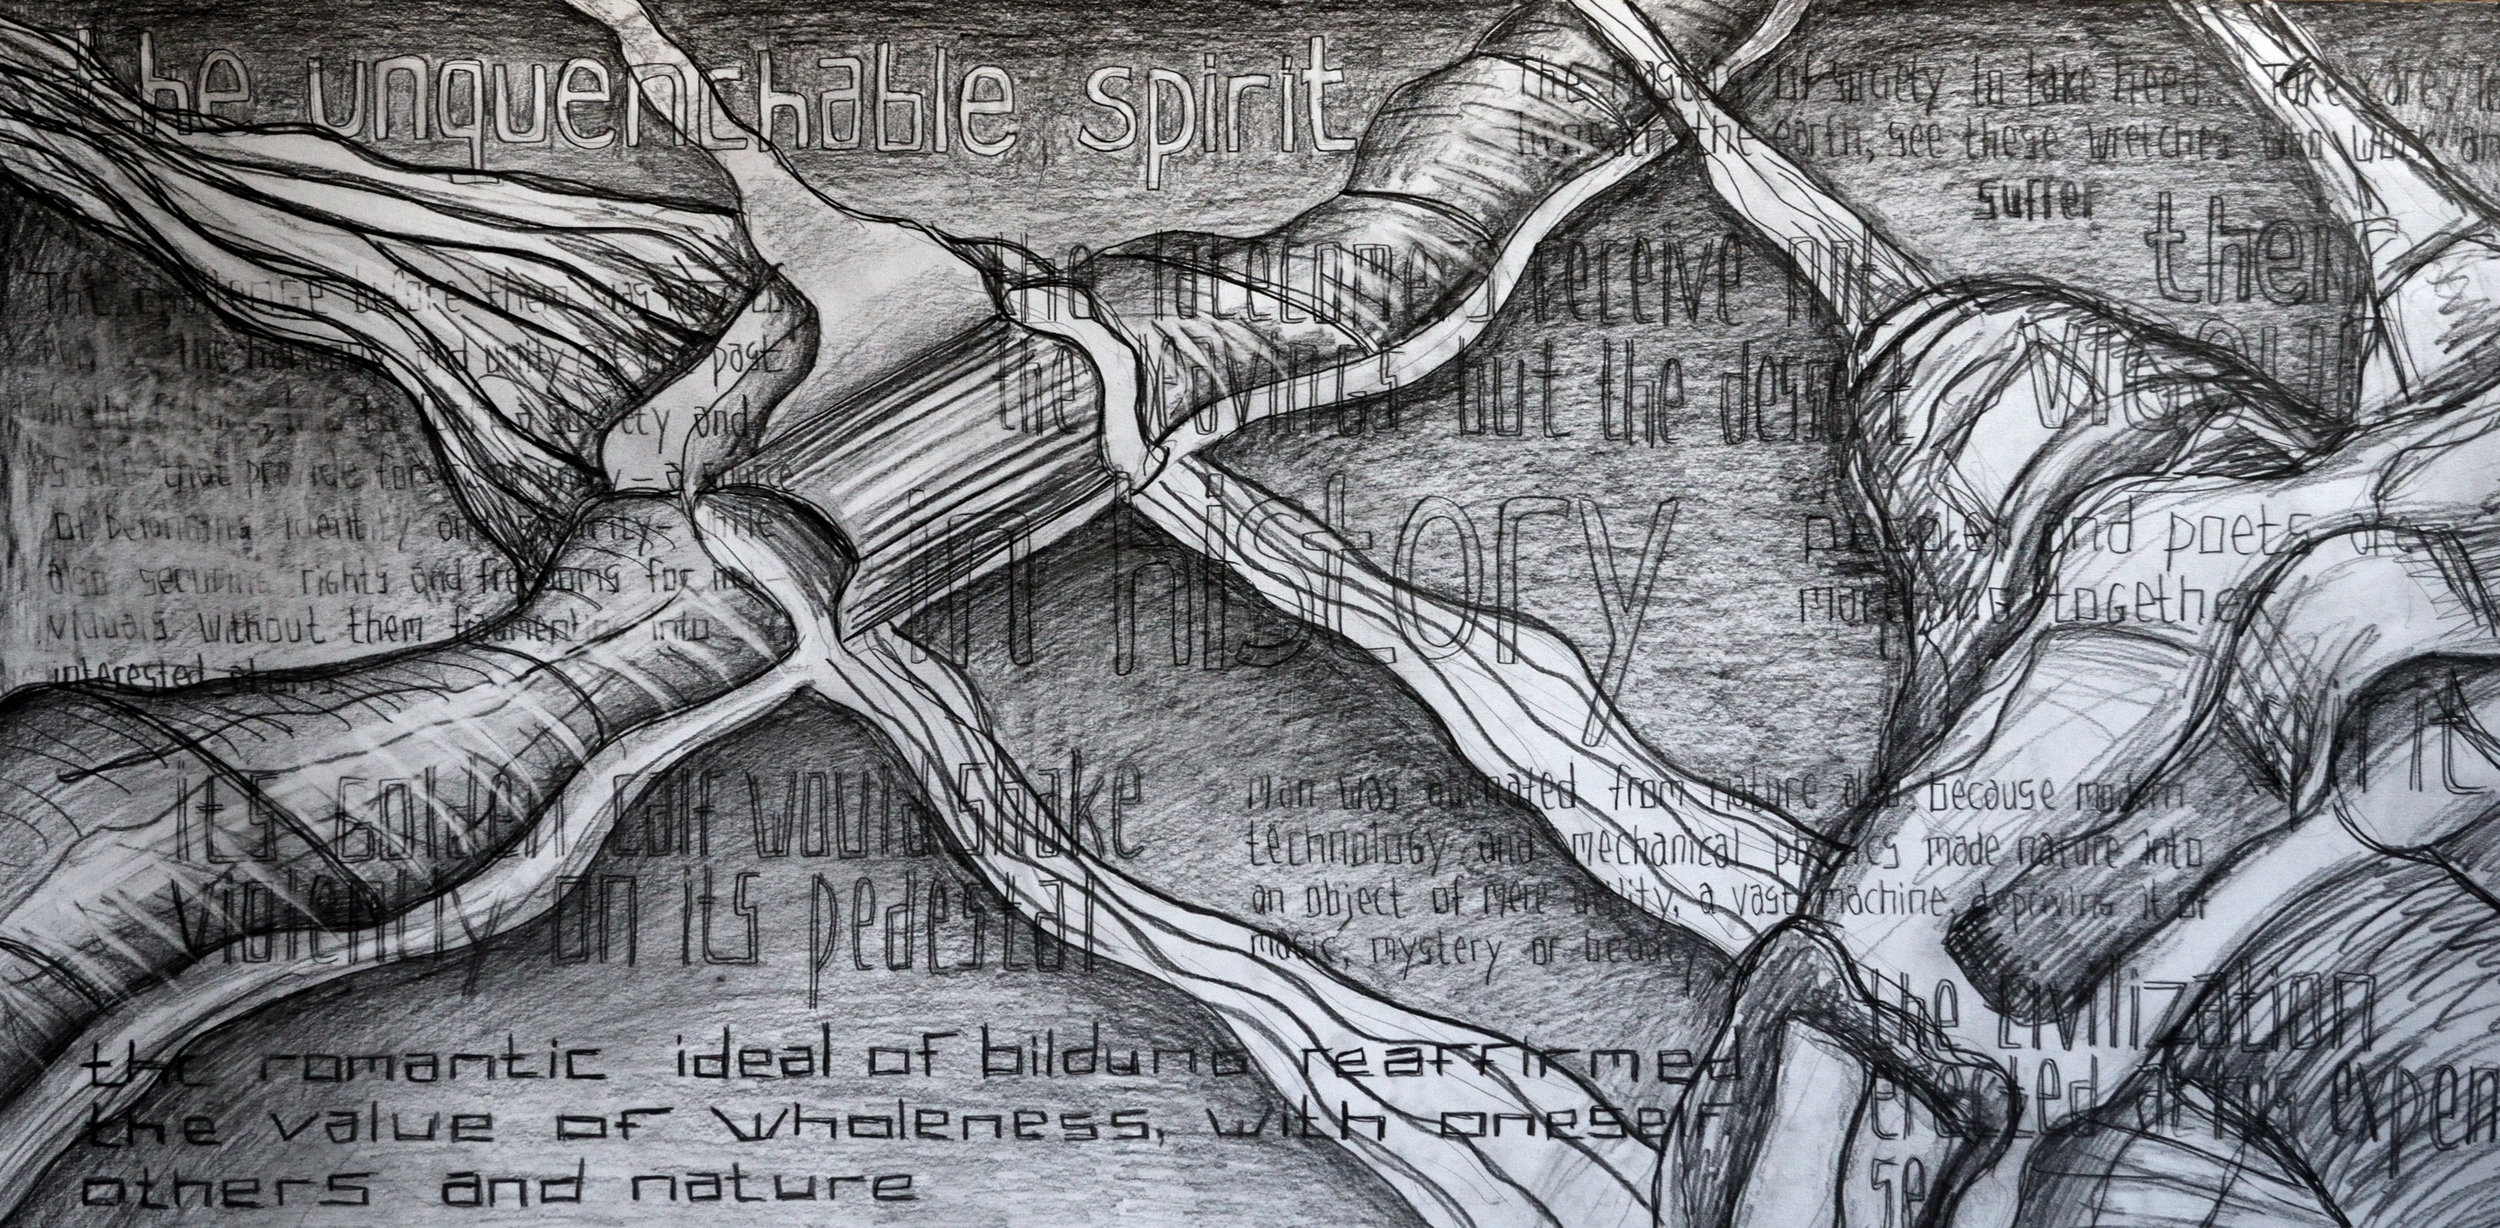 The Unquenchable Spirit of Self-Expression and Wholeness, pencil on paper, 70x140cm